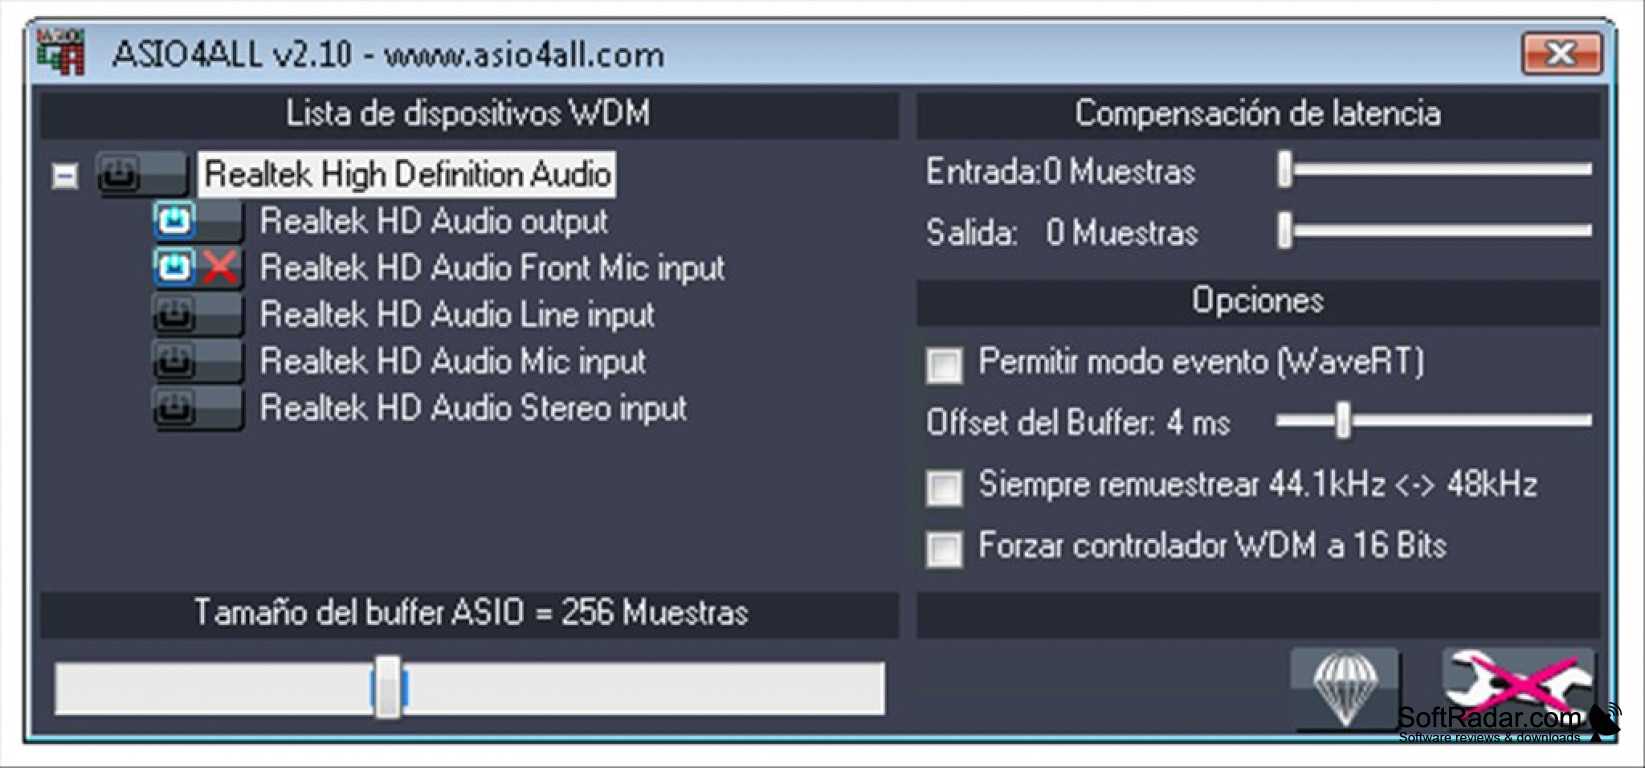 download asio4all torrent